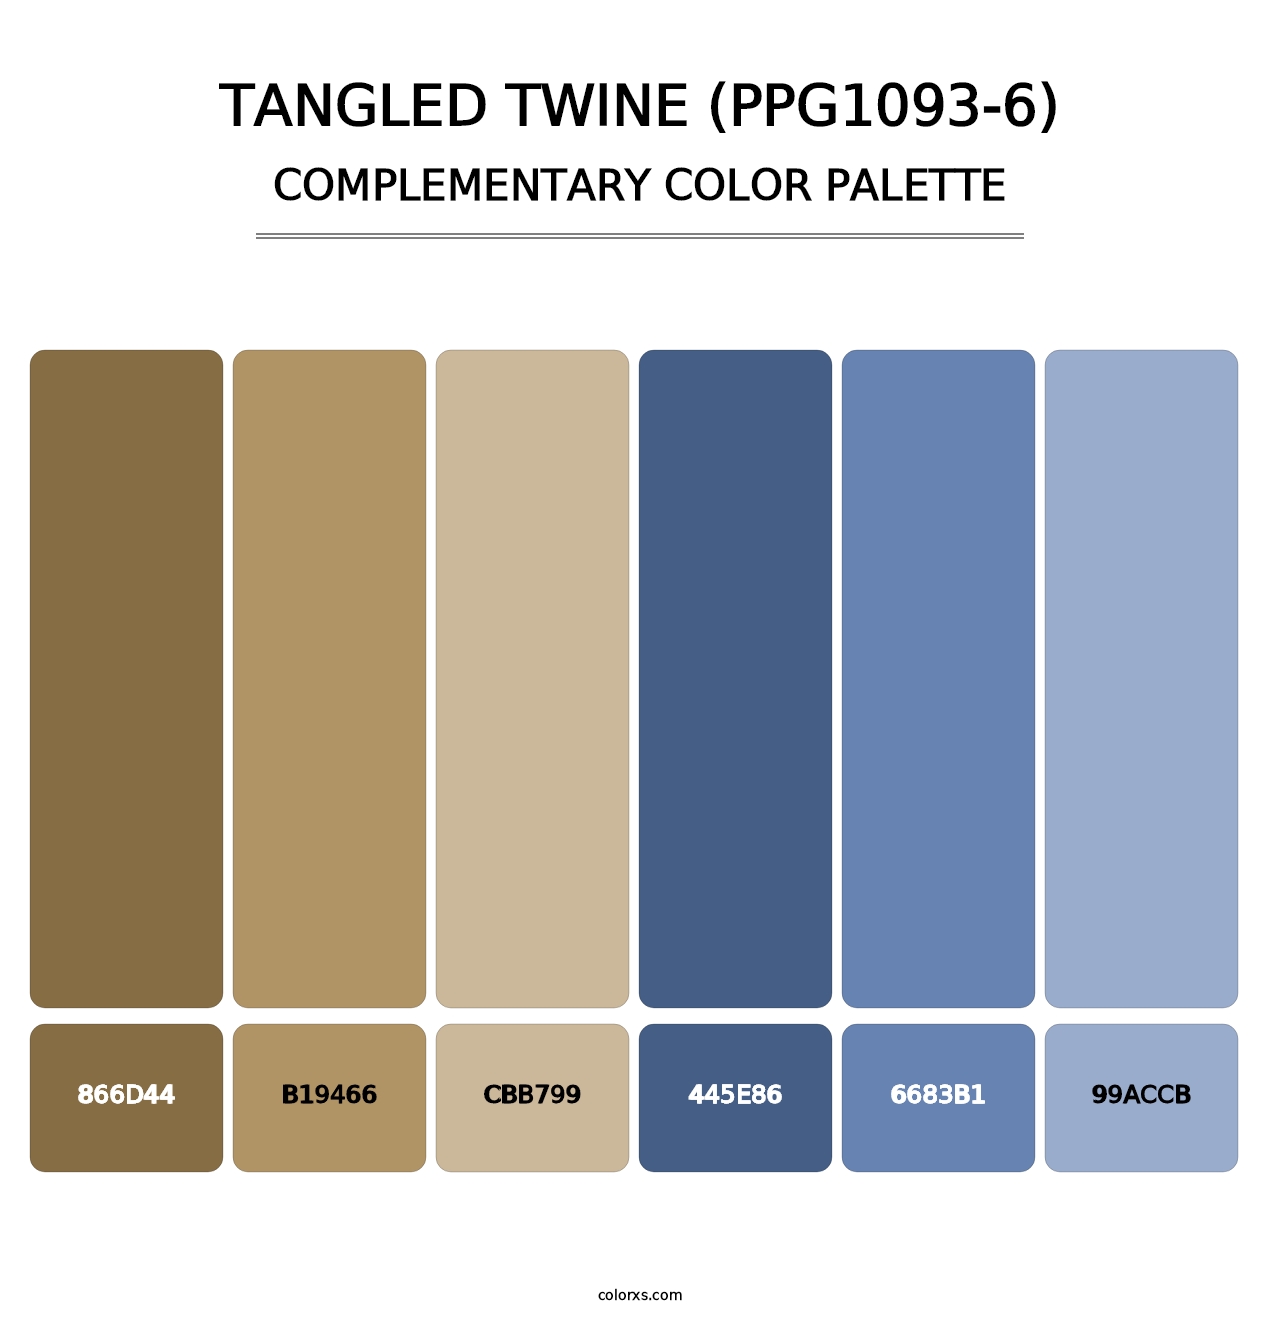 Tangled Twine (PPG1093-6) - Complementary Color Palette